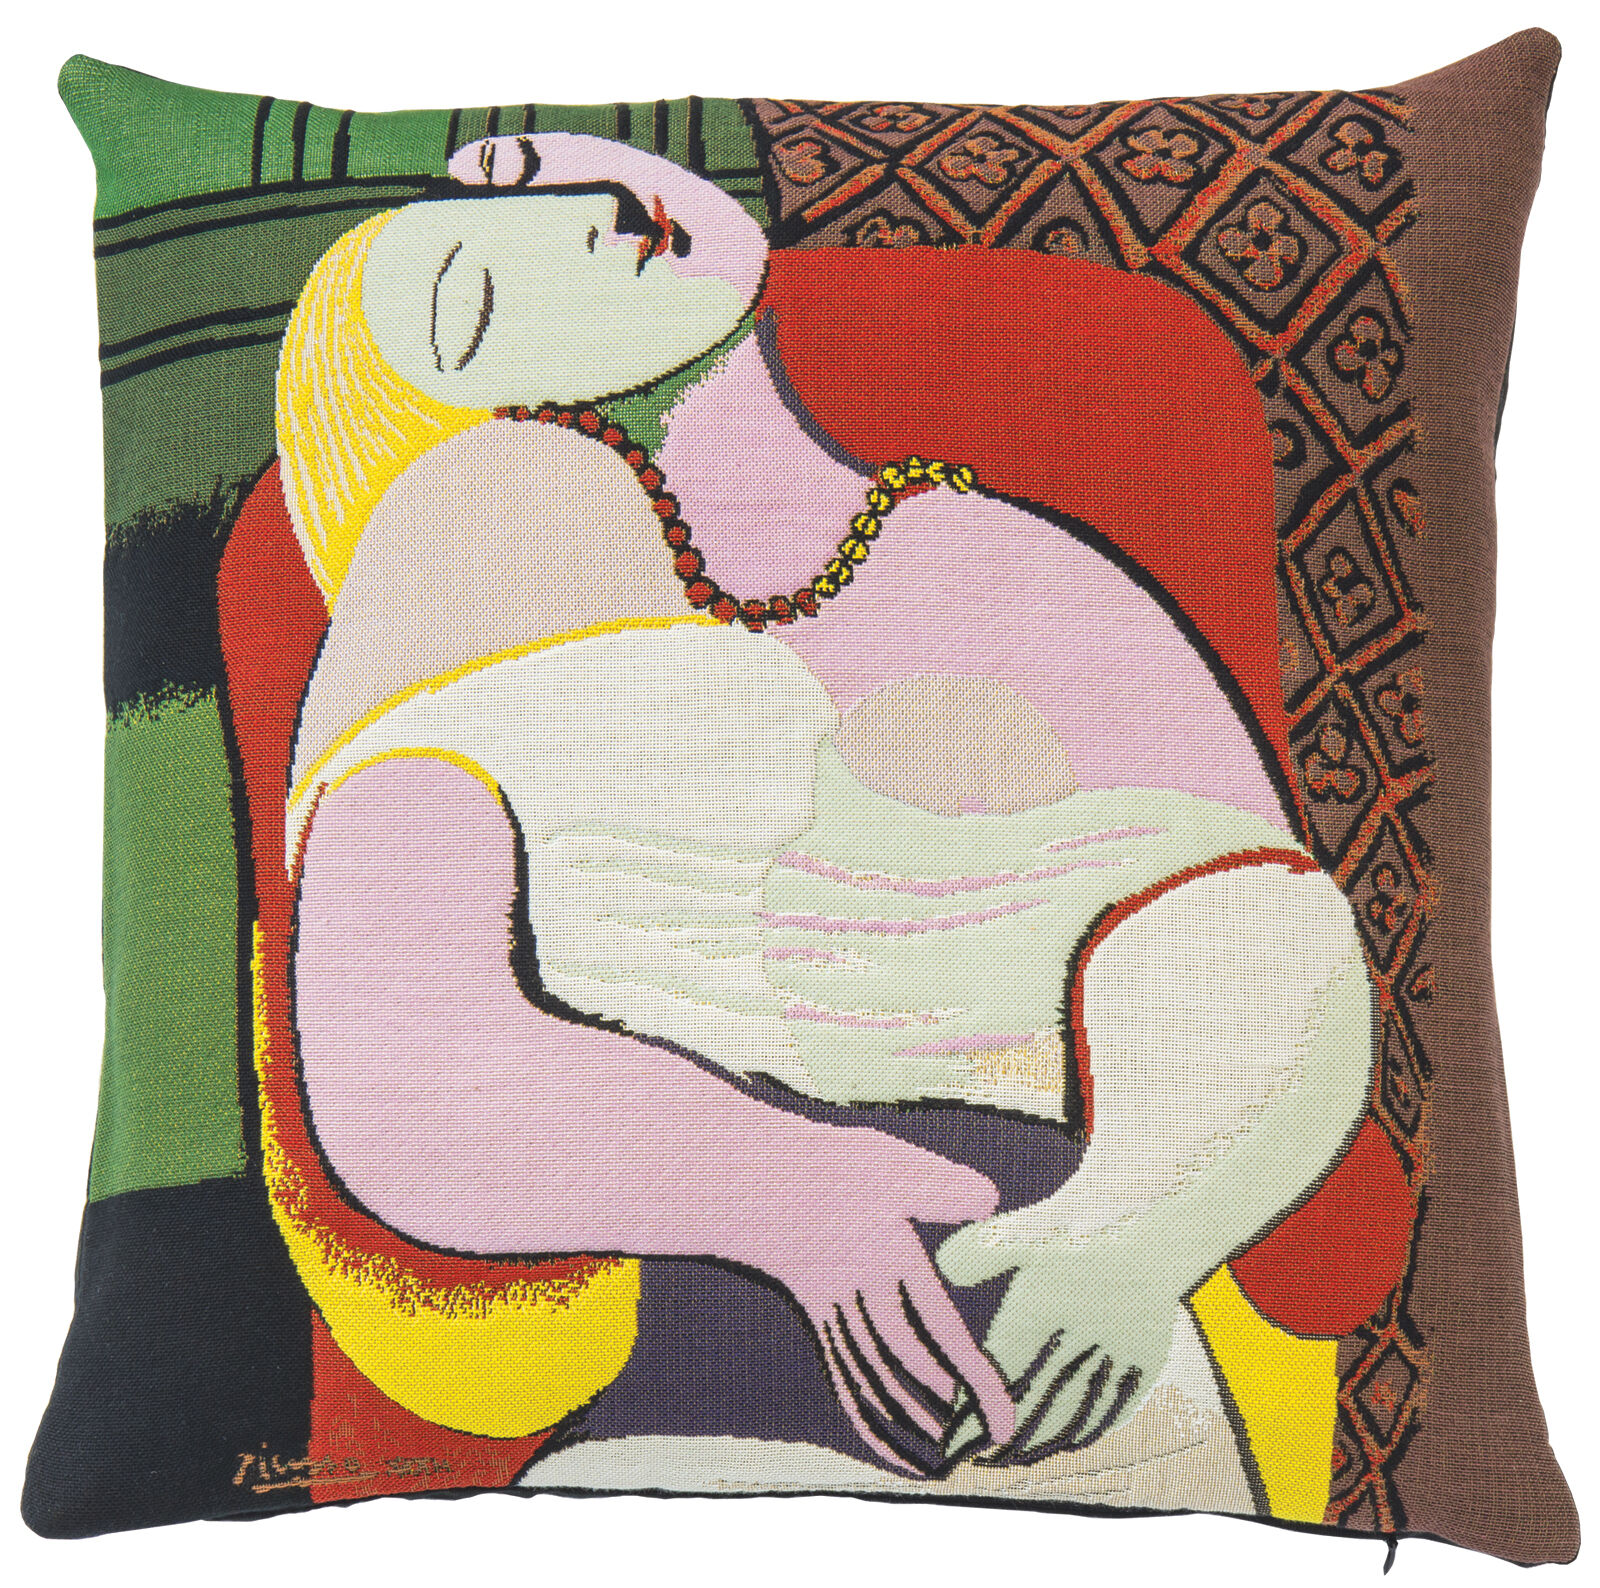 Cushion cover "Le Rêve - The Dream" (1932) by Pablo Picasso